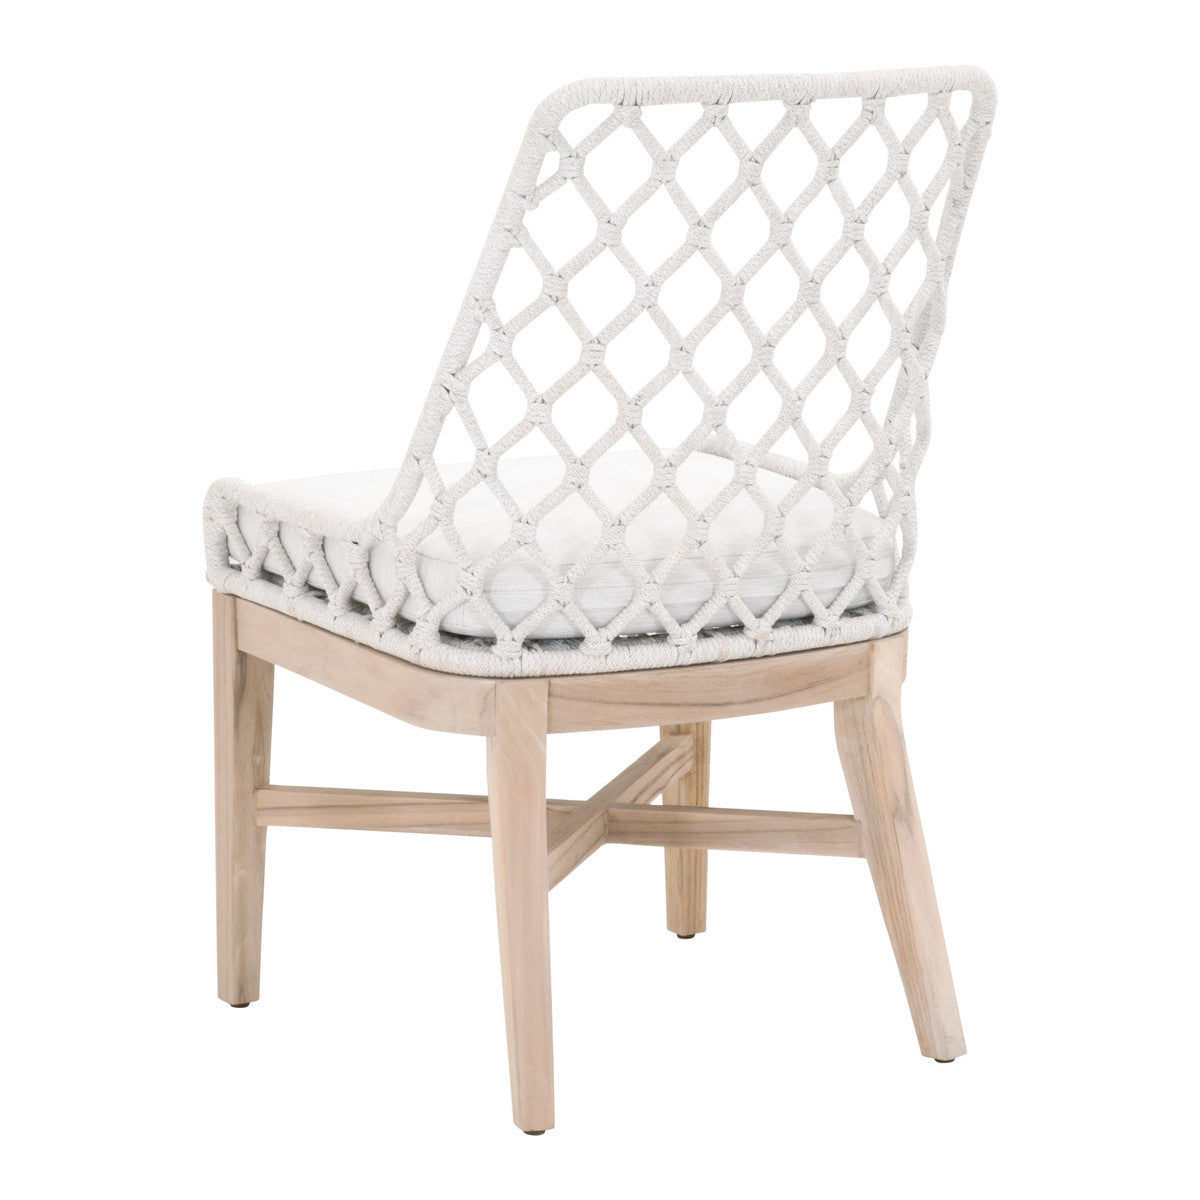 Rope Work Outdoor Dining Chair